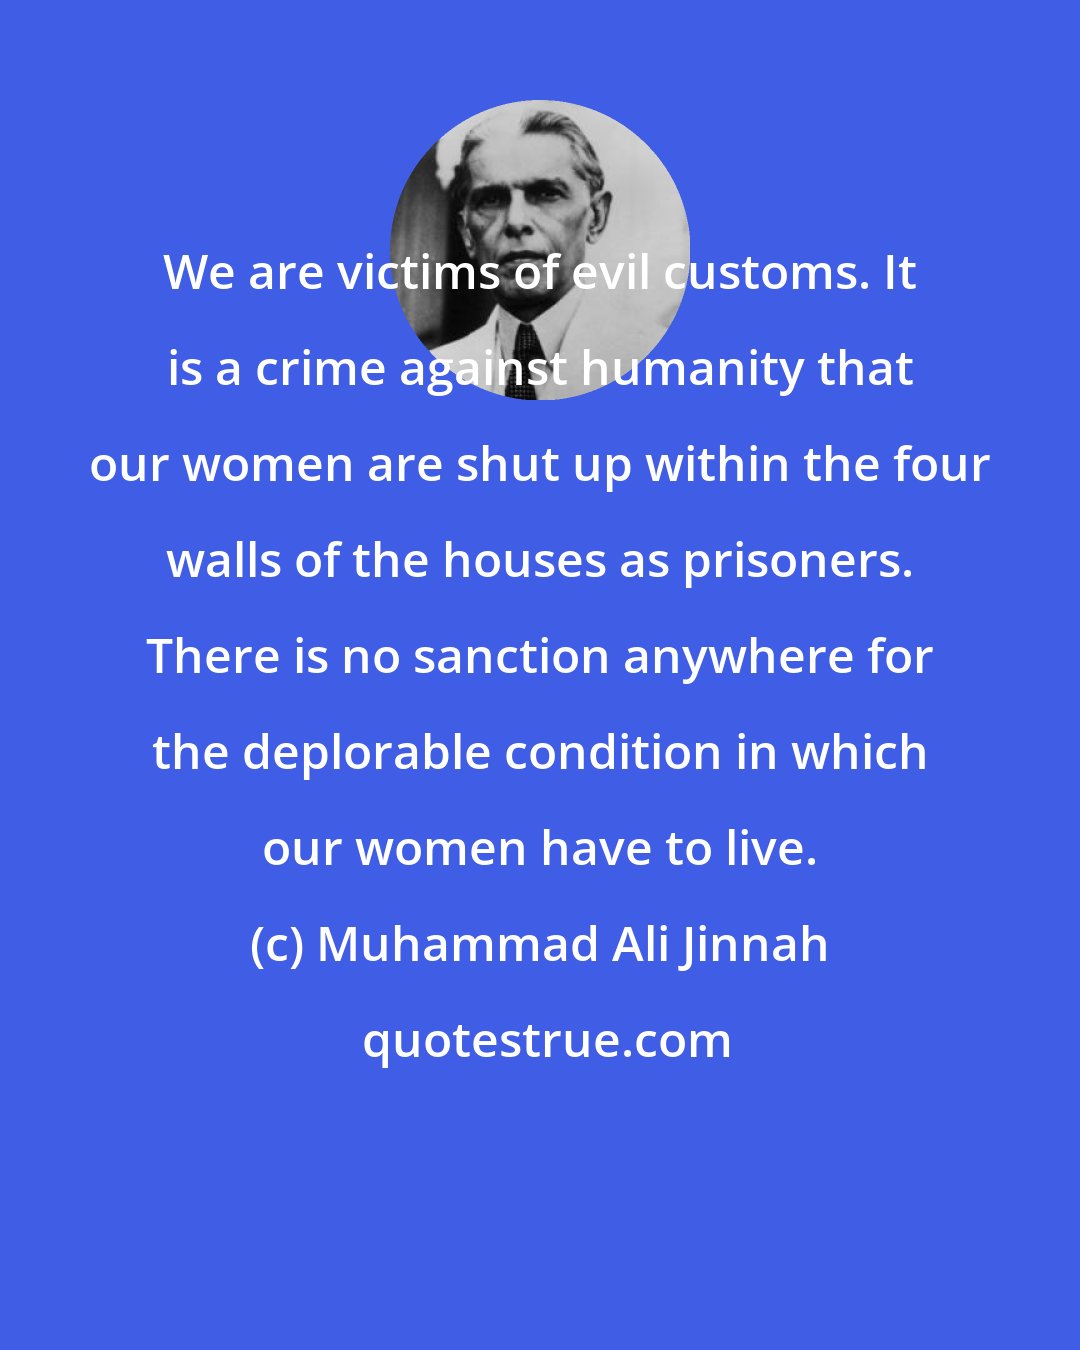 Muhammad Ali Jinnah: We are victims of evil customs. It is a crime against humanity that our women are shut up within the four walls of the houses as prisoners. There is no sanction anywhere for the deplorable condition in which our women have to live.